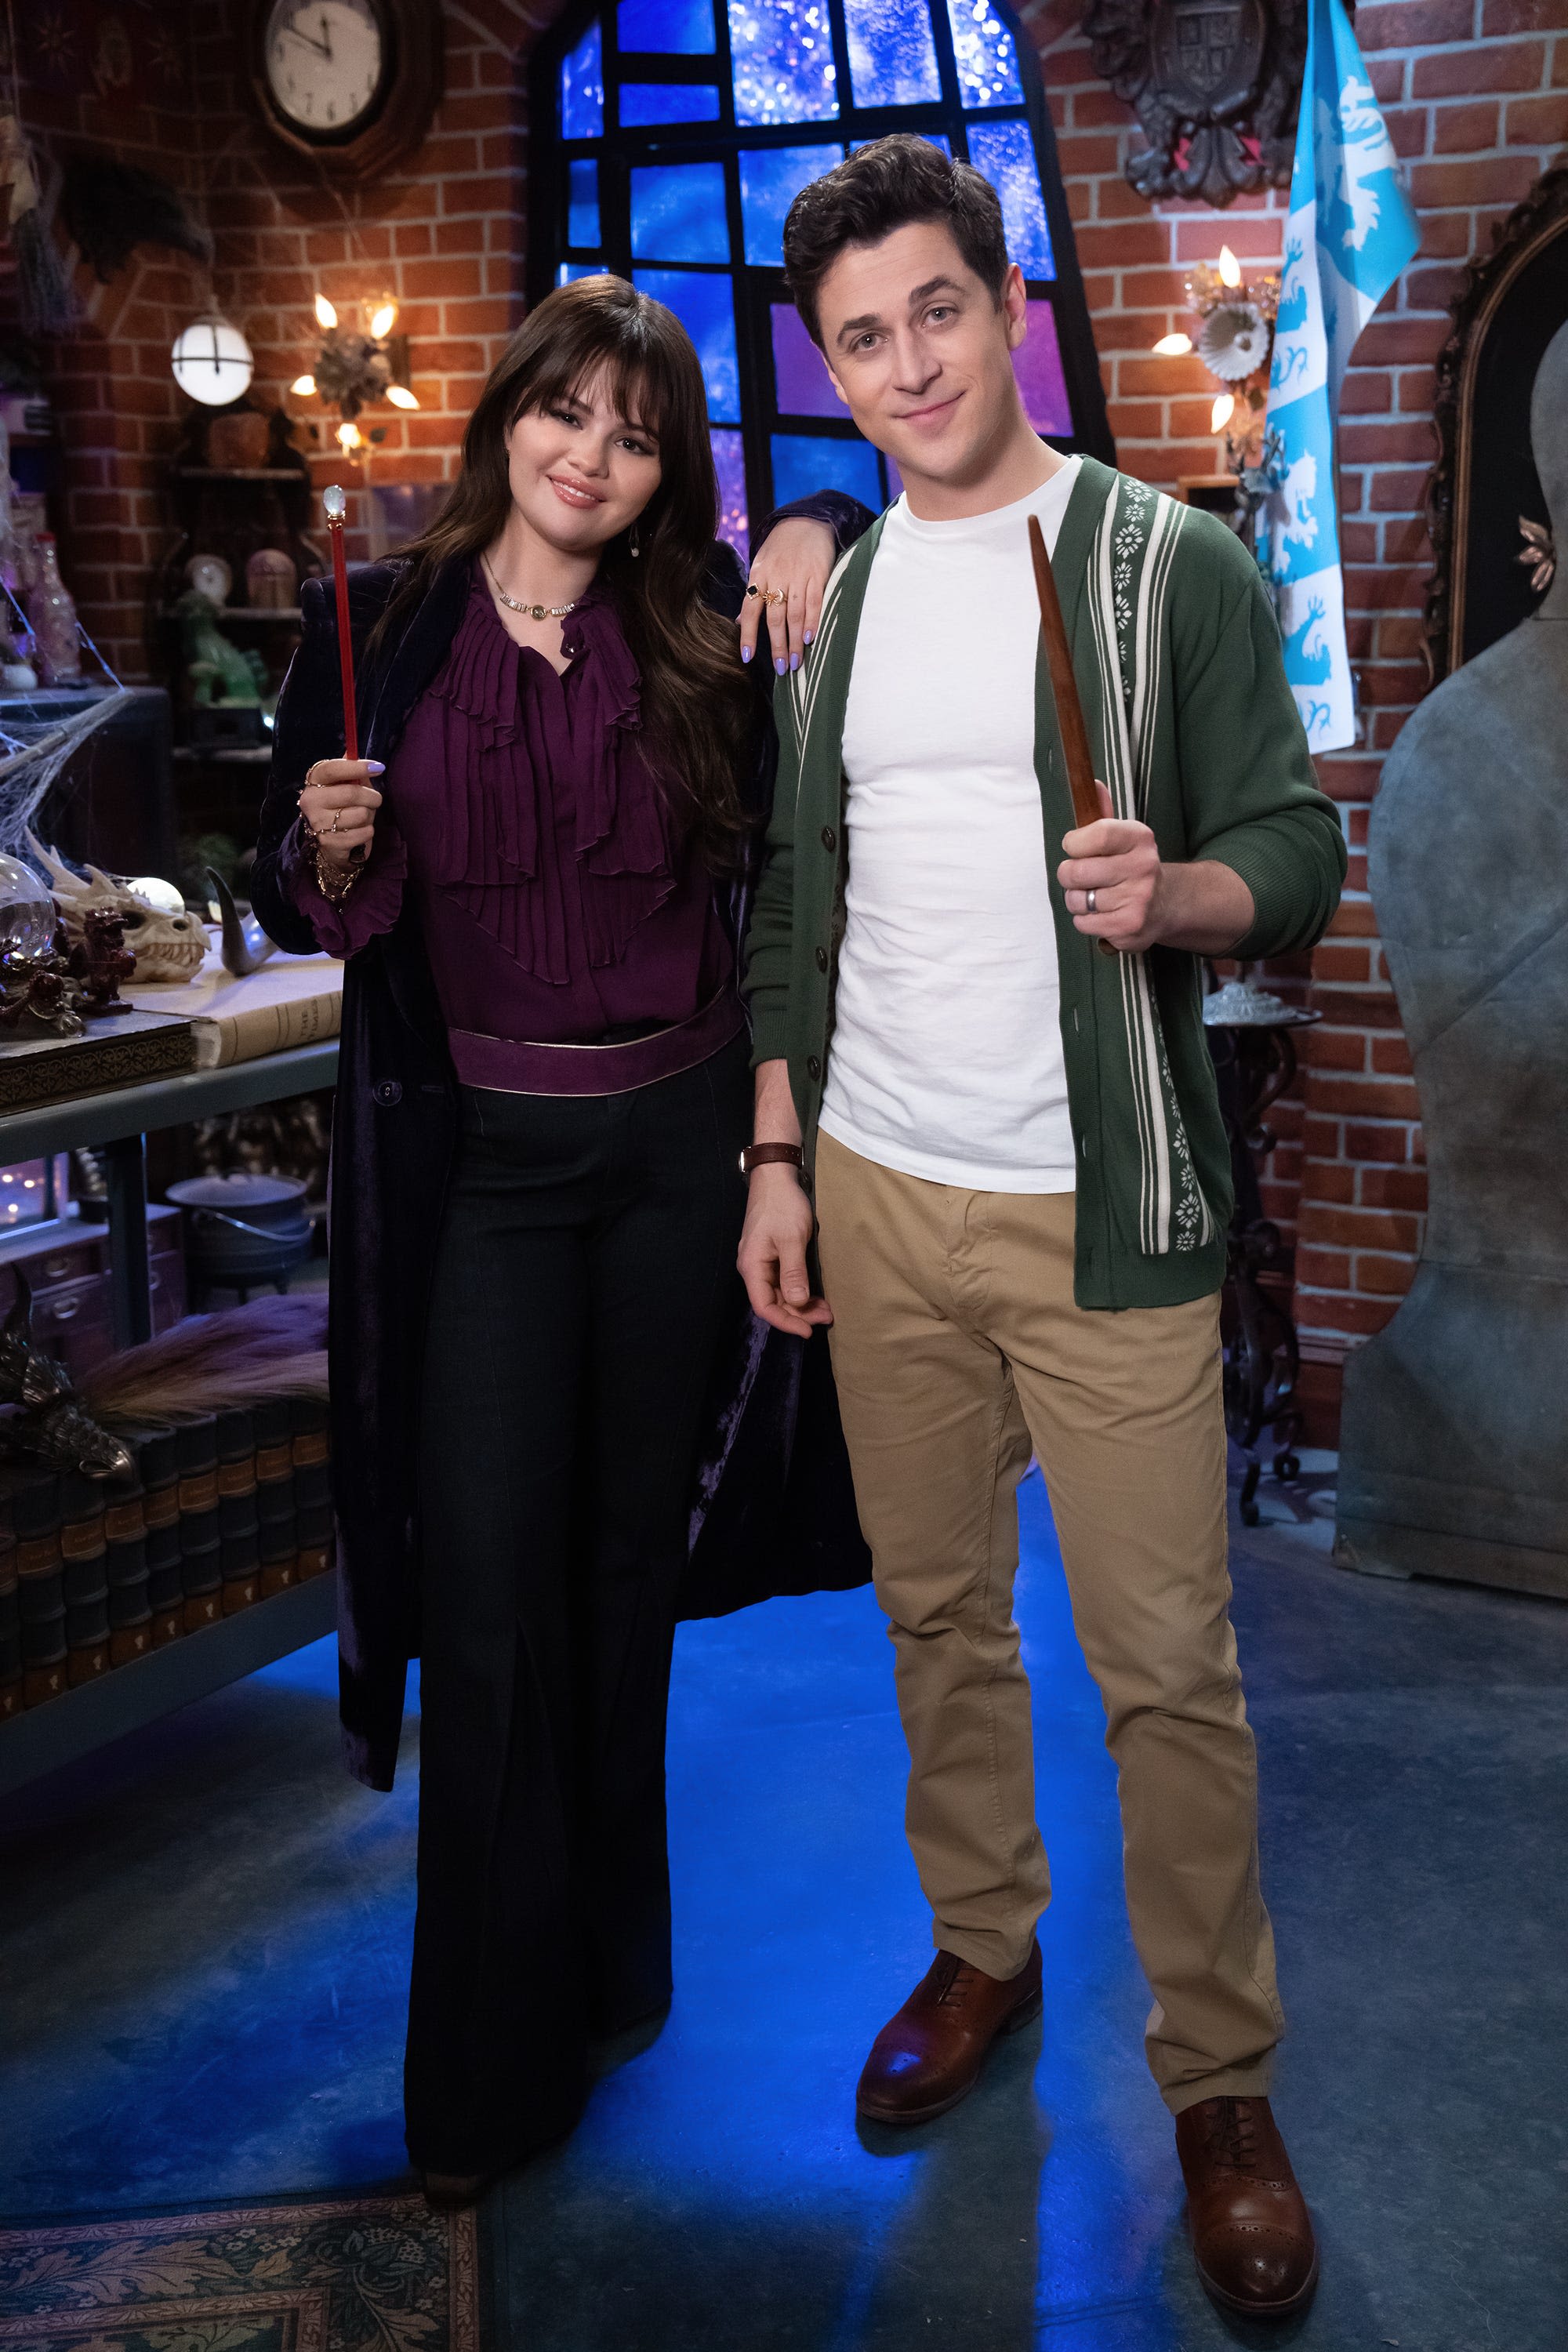 'Wizards of Waverly Place': First look photos of Selena Gomez, David Henrie in upcoming spinoff